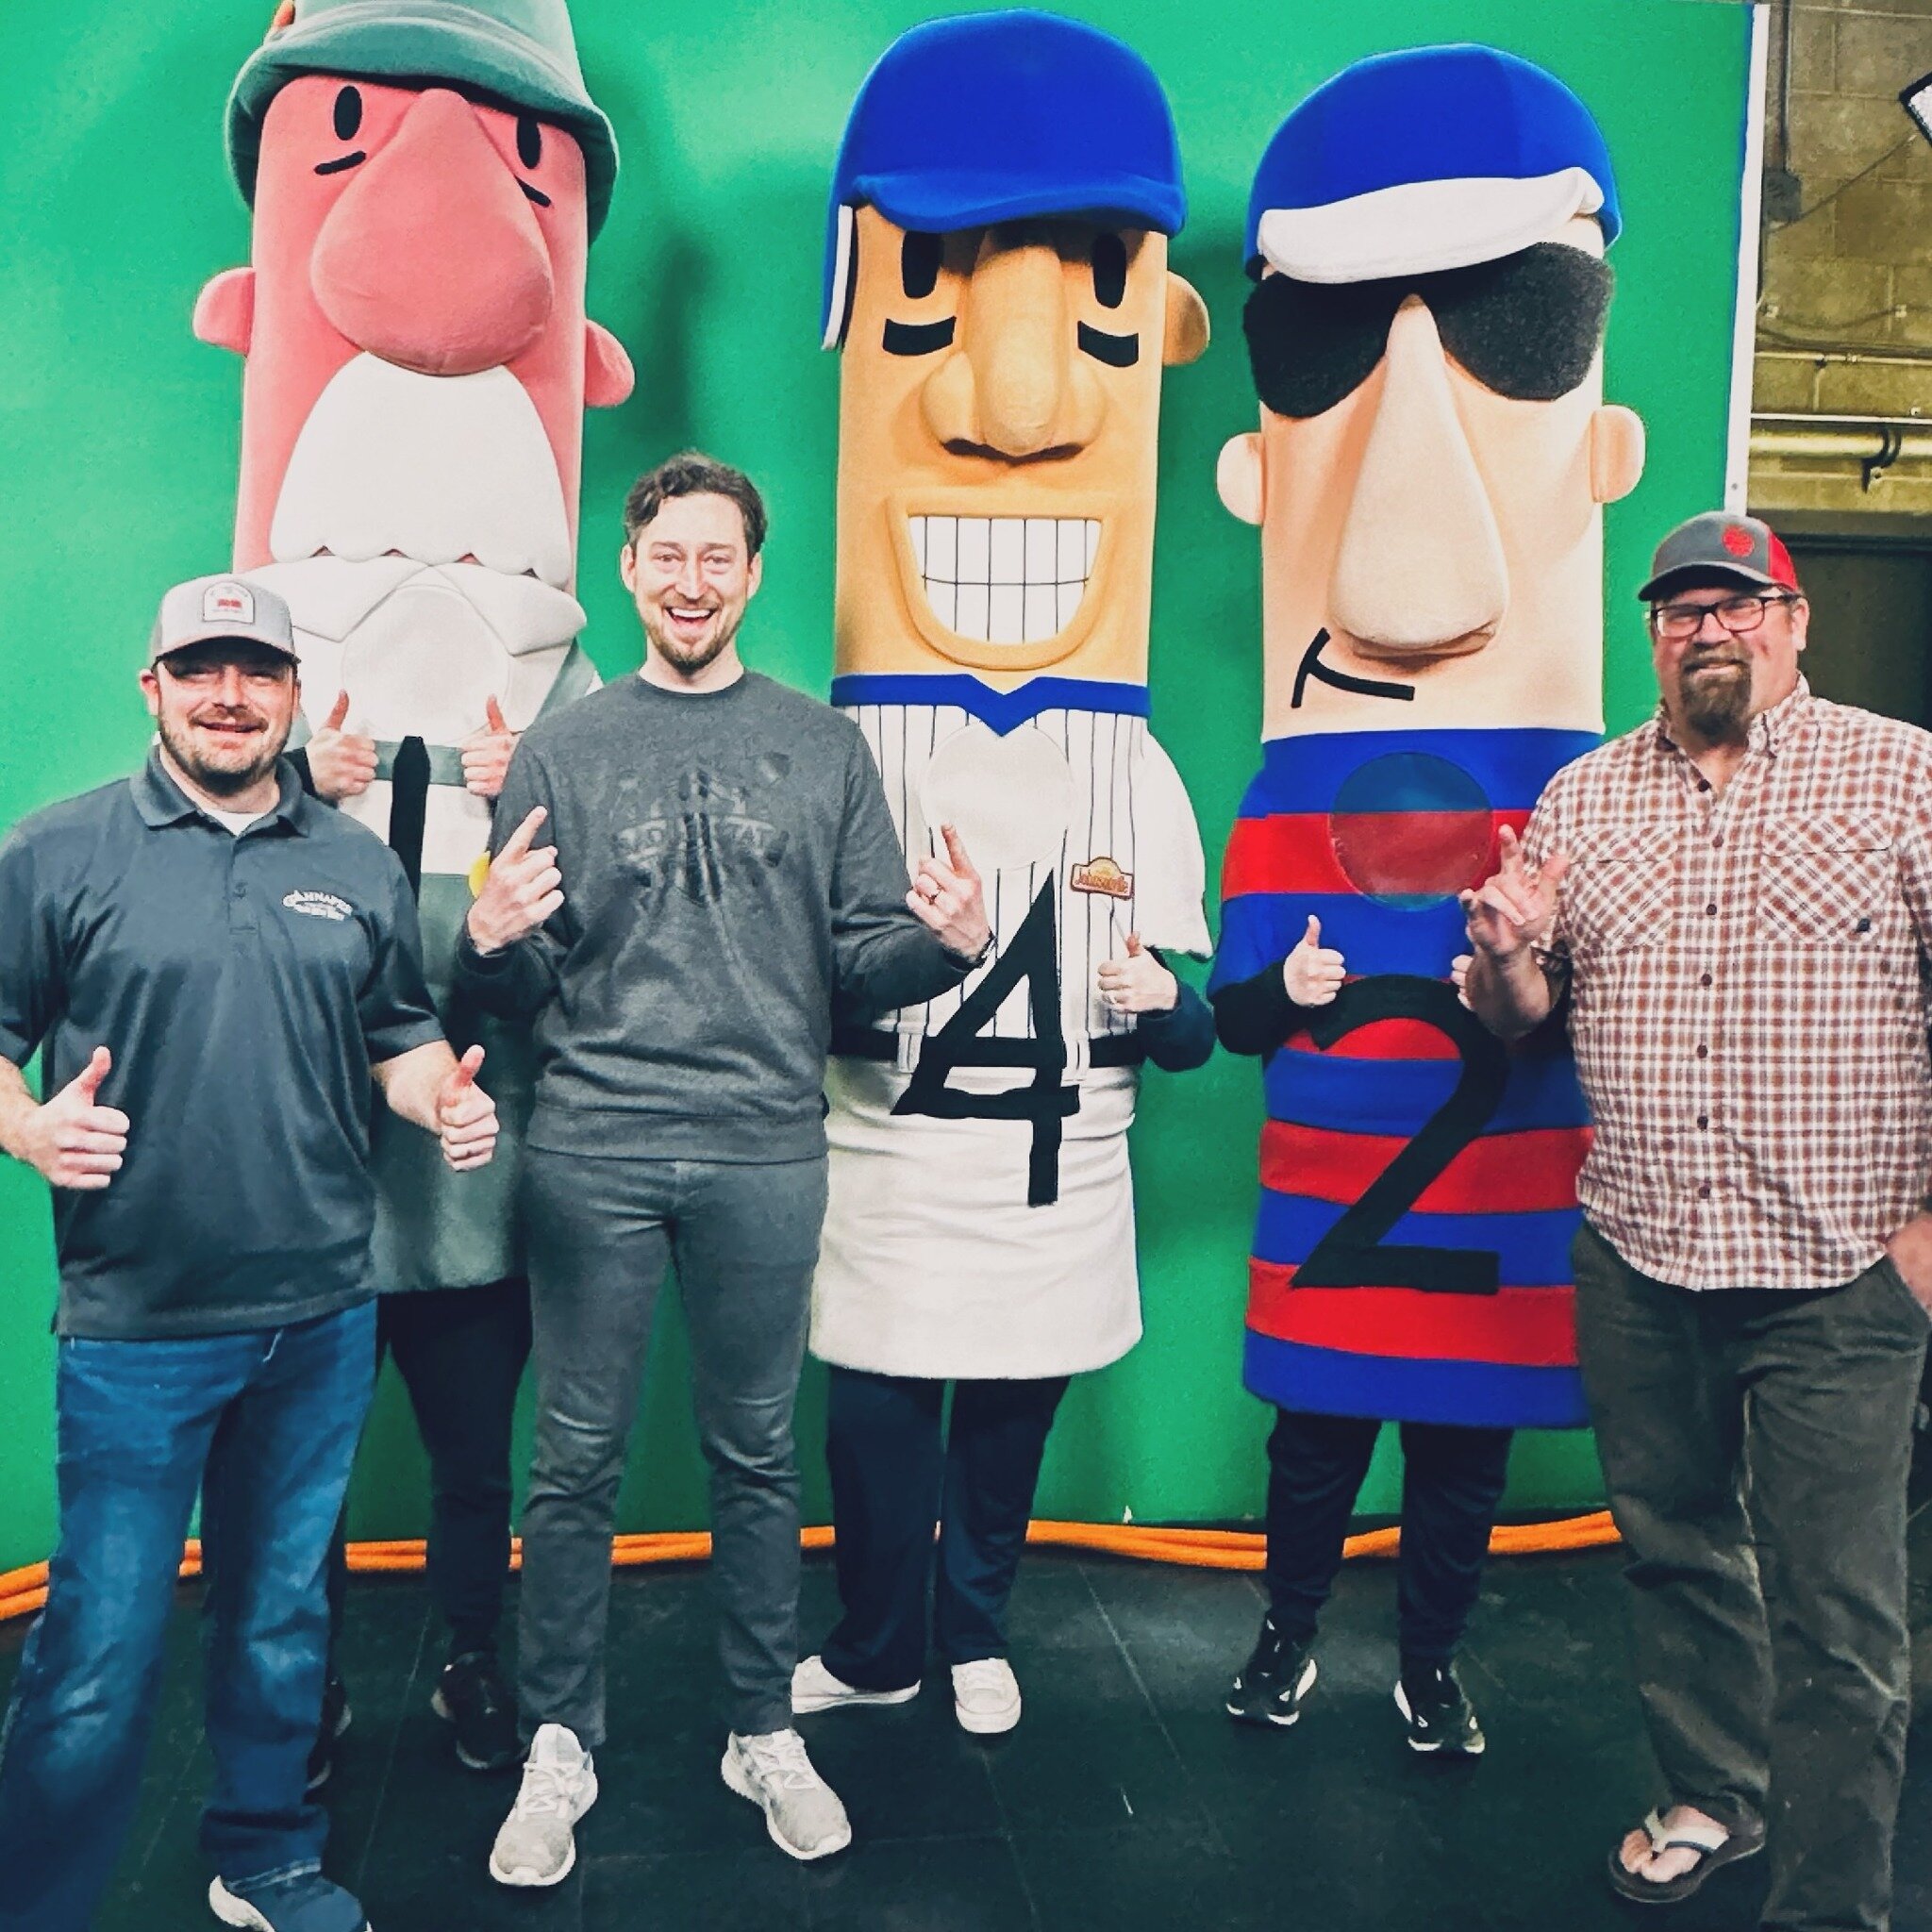 Thanks to @wfrvlocal5 for inviting us out this morning to talk about the Decade Delight collab release this coming Sunday at all three tap rooms! We ran into a few real meaty fellows on set and couldn&rsquo;t pass up the opportunity to grab a pic&hel